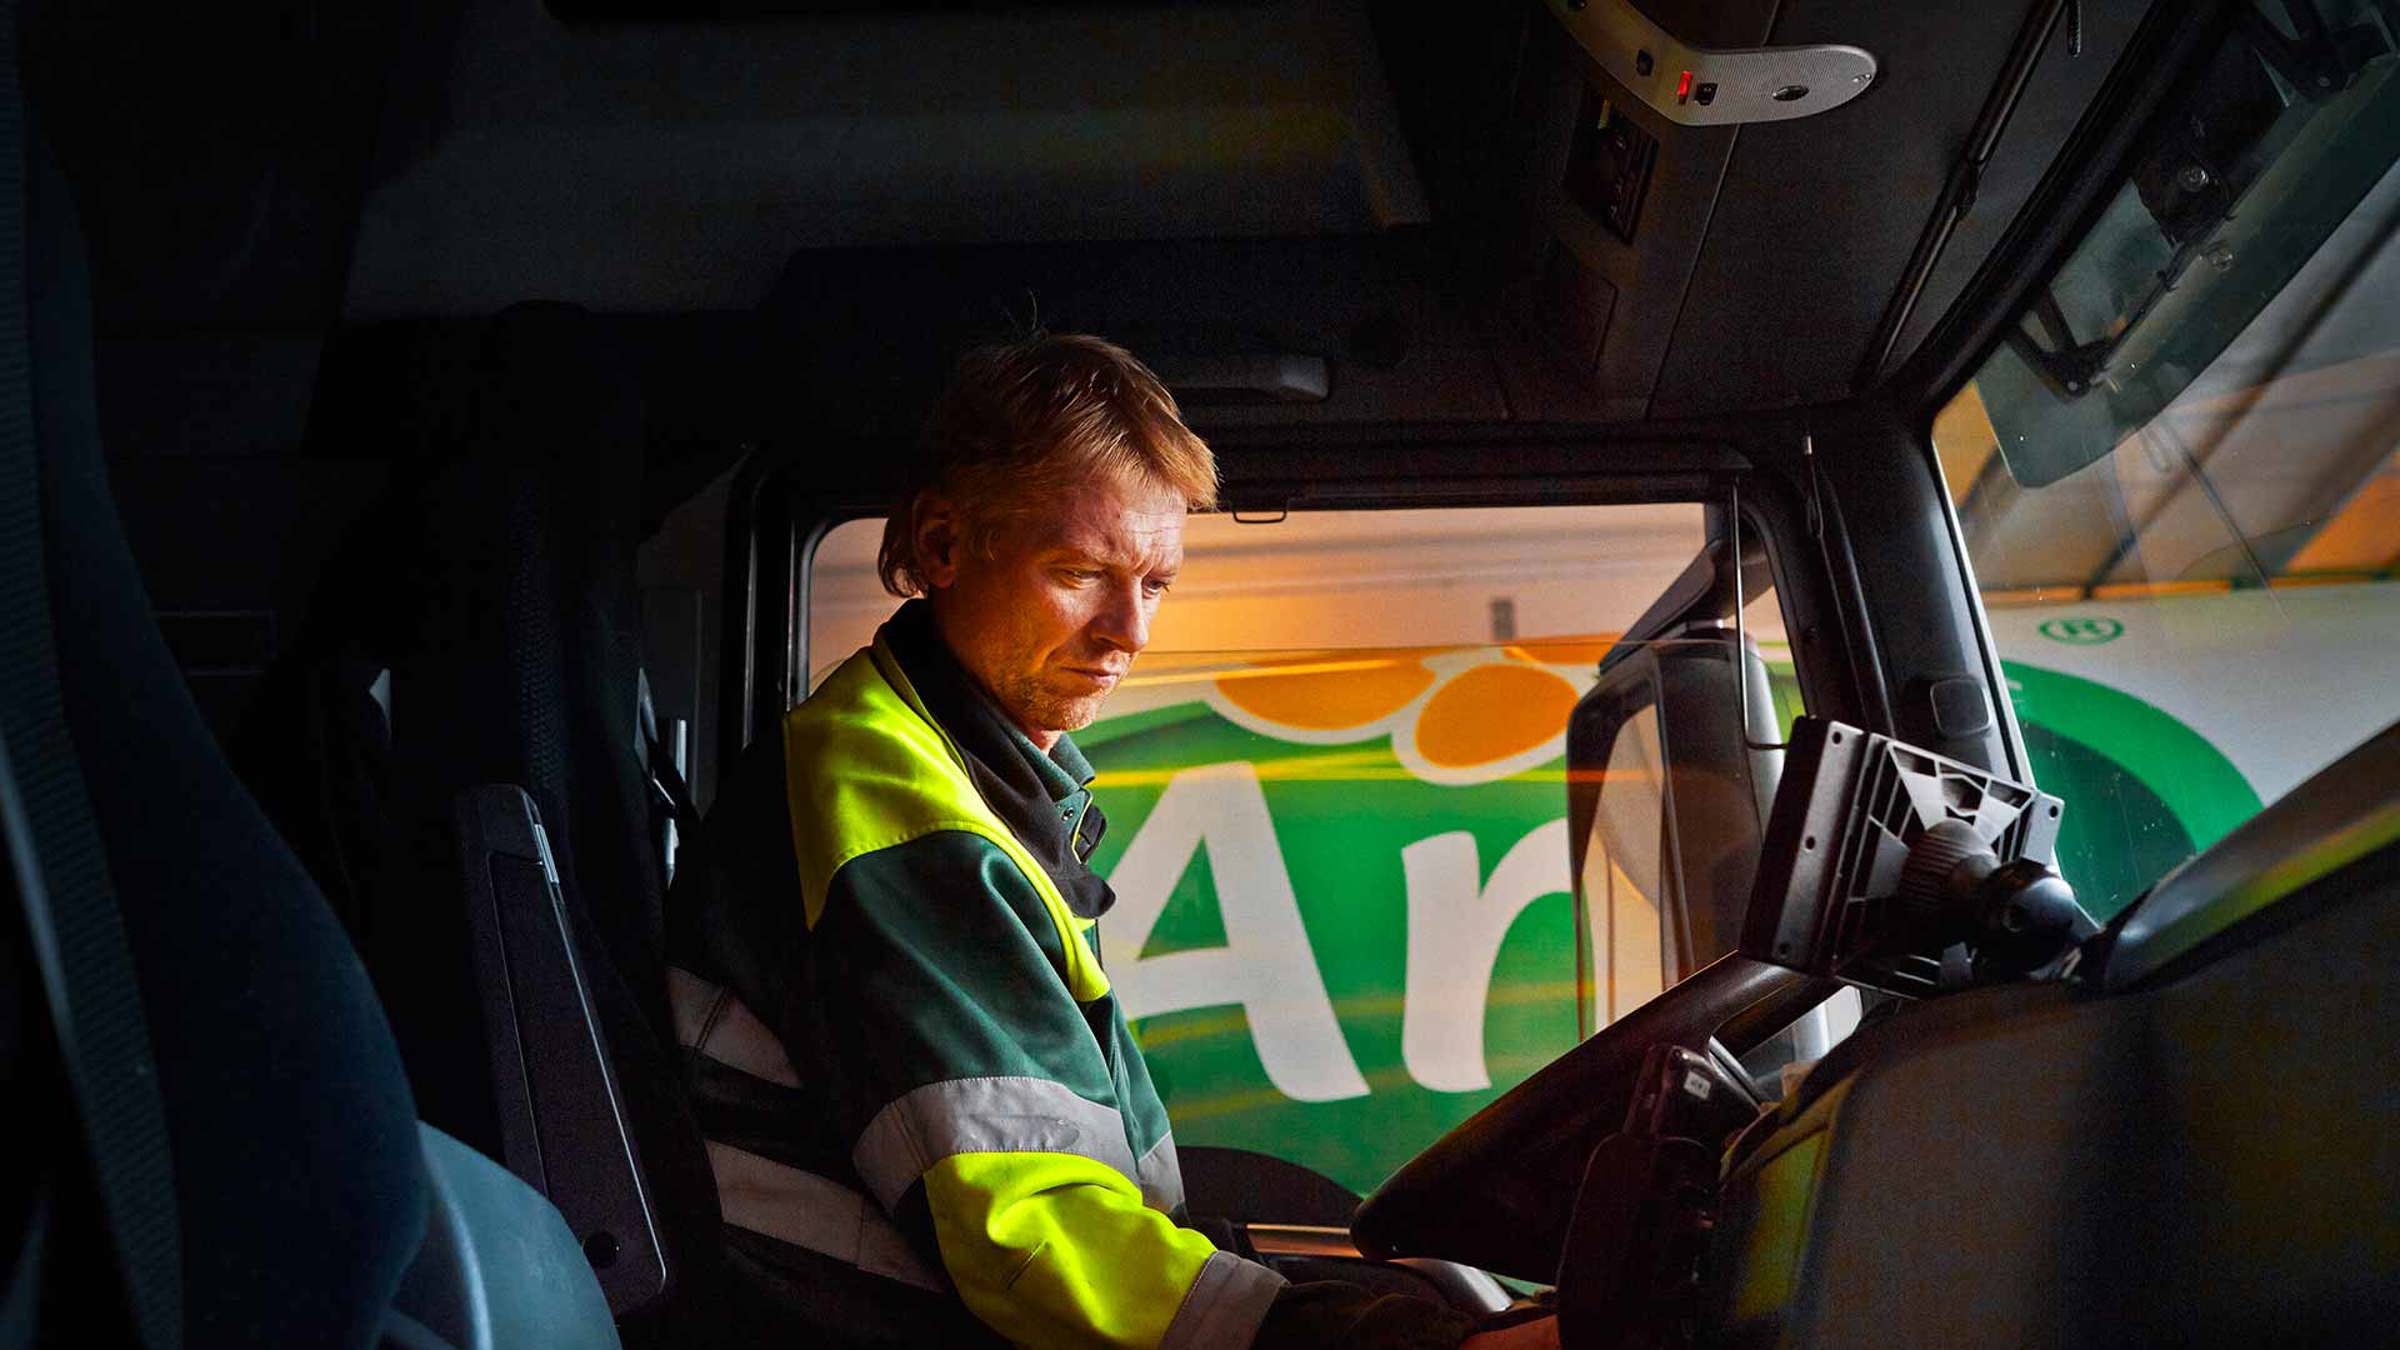 An Arla truck driver in his cab